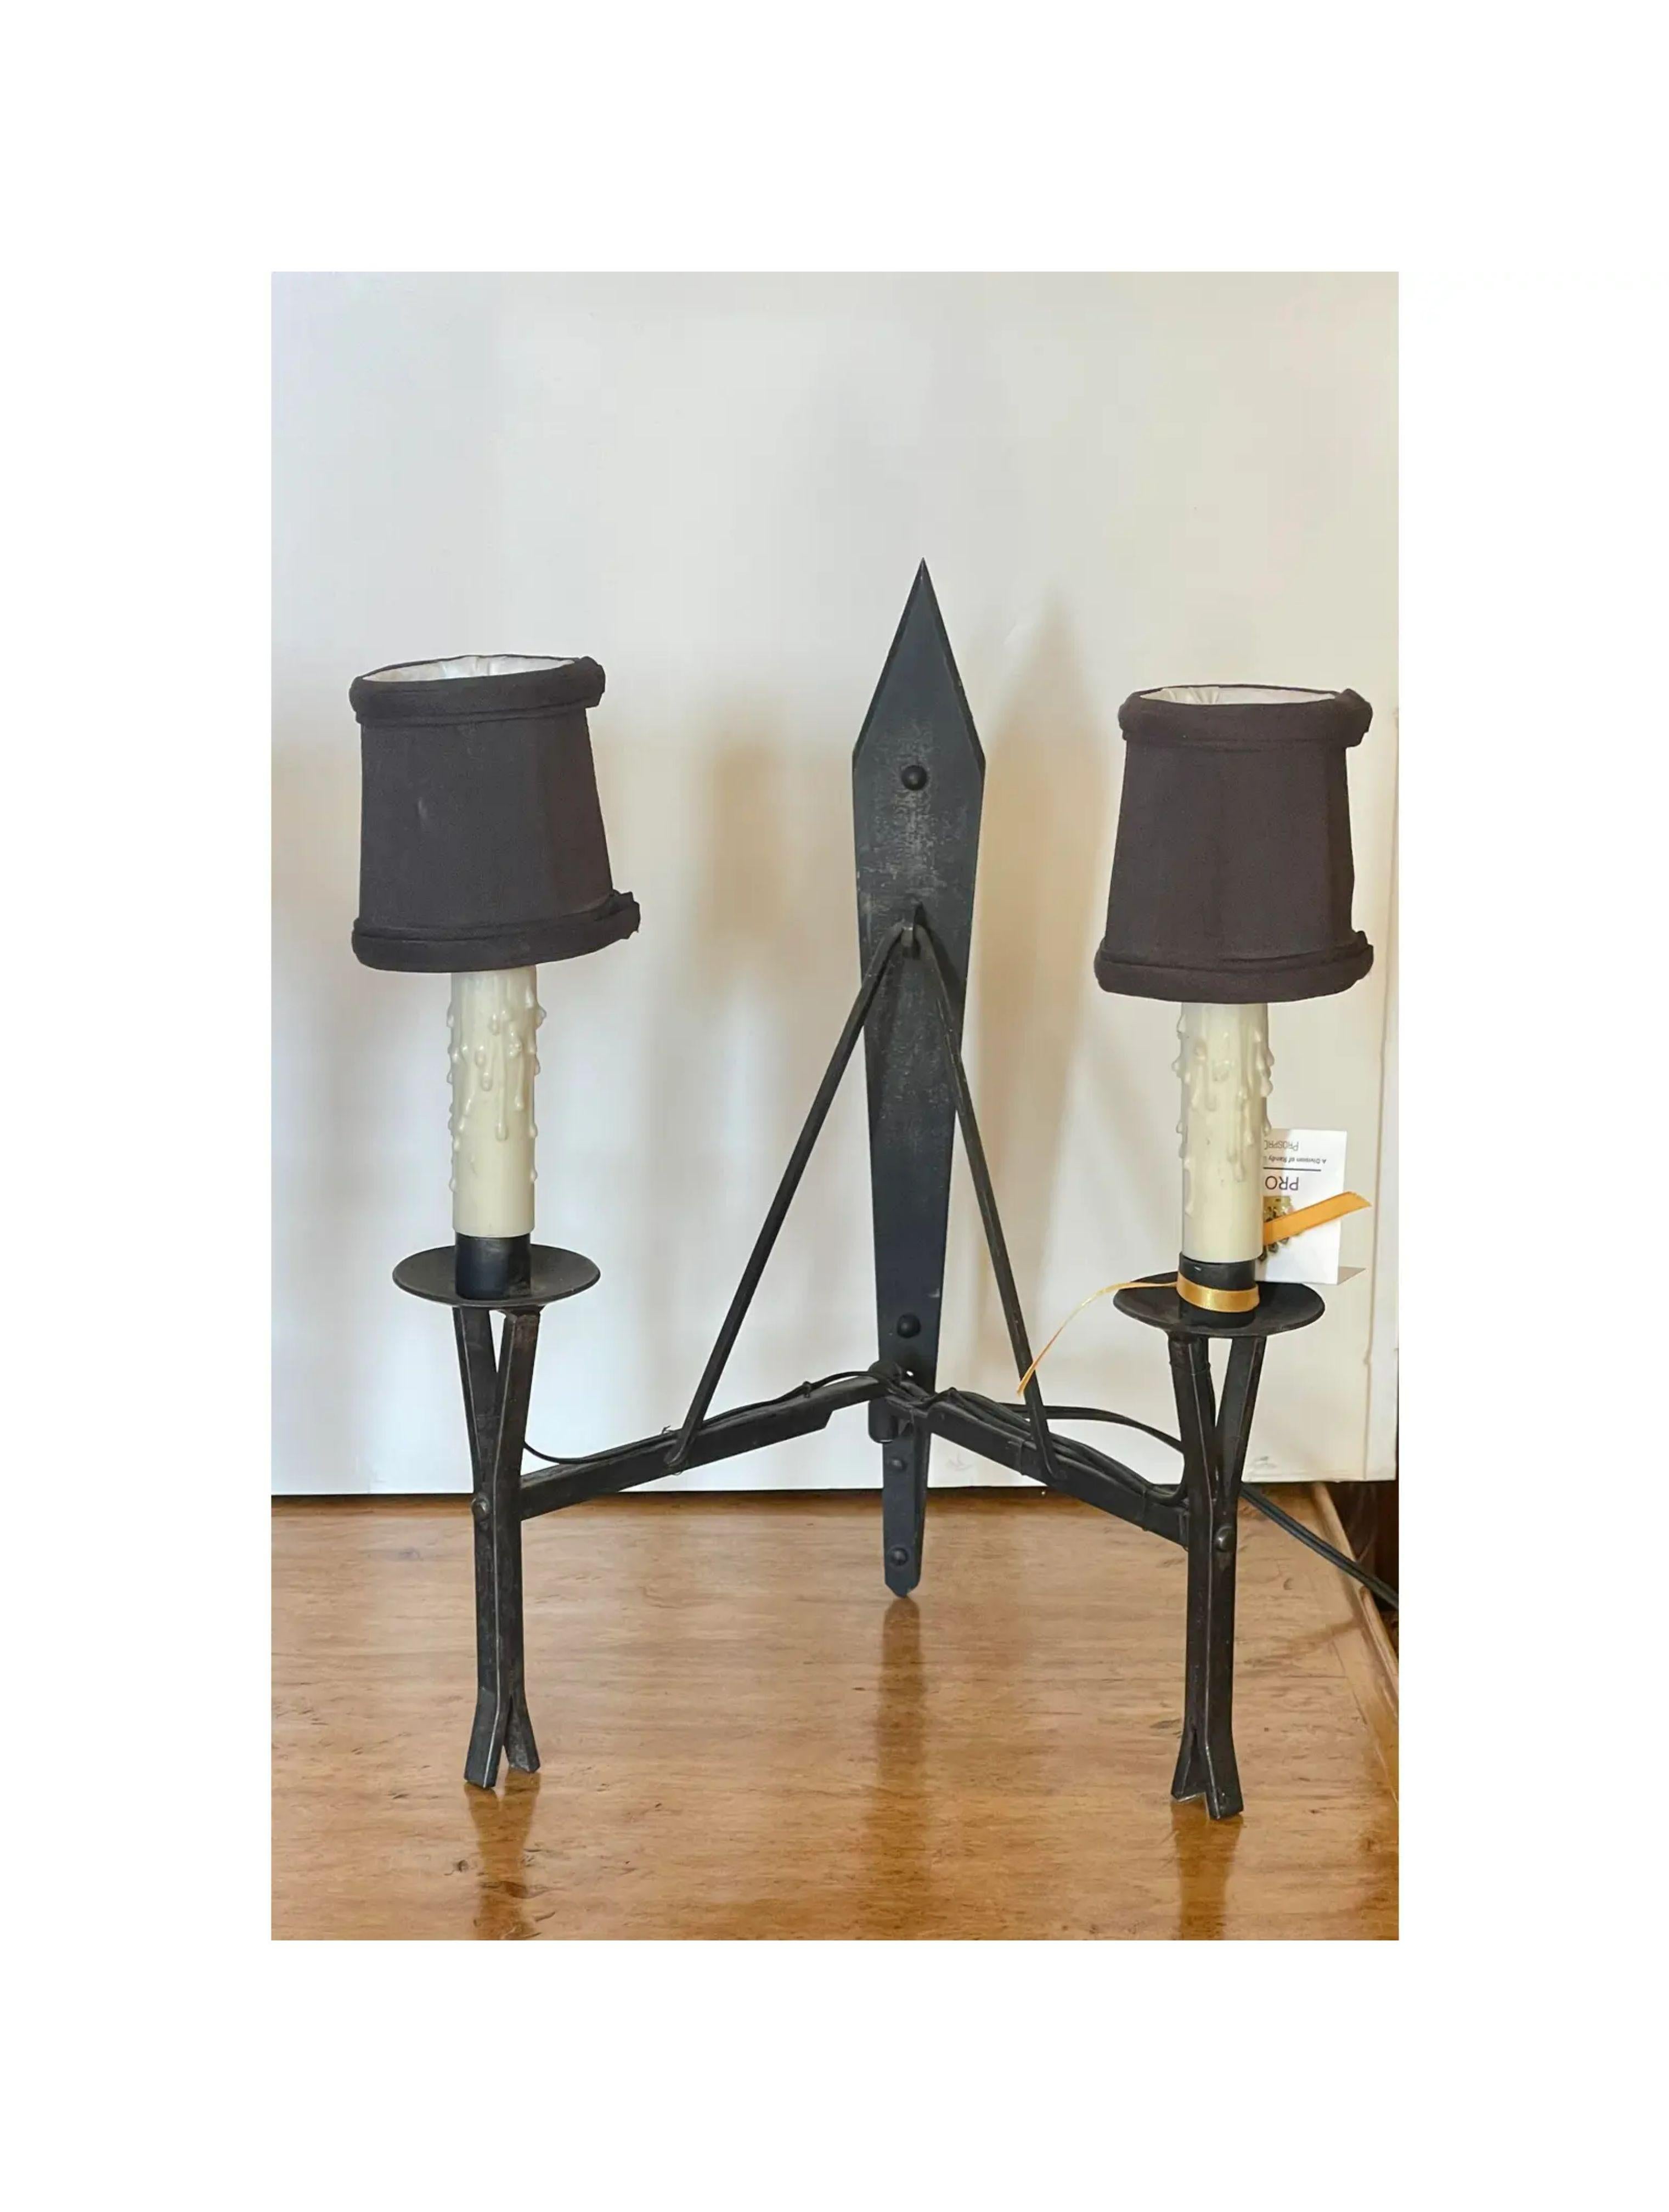 Vintage Giacometti style wrought iron wall light sconces - a pair

Additional information: 
Materials: lights, wrought iron
Color: Black
Styled After: Alberto & Diego Giacometti
Period: Mid 20th Century
Styles: Modern
Lamp Shade: